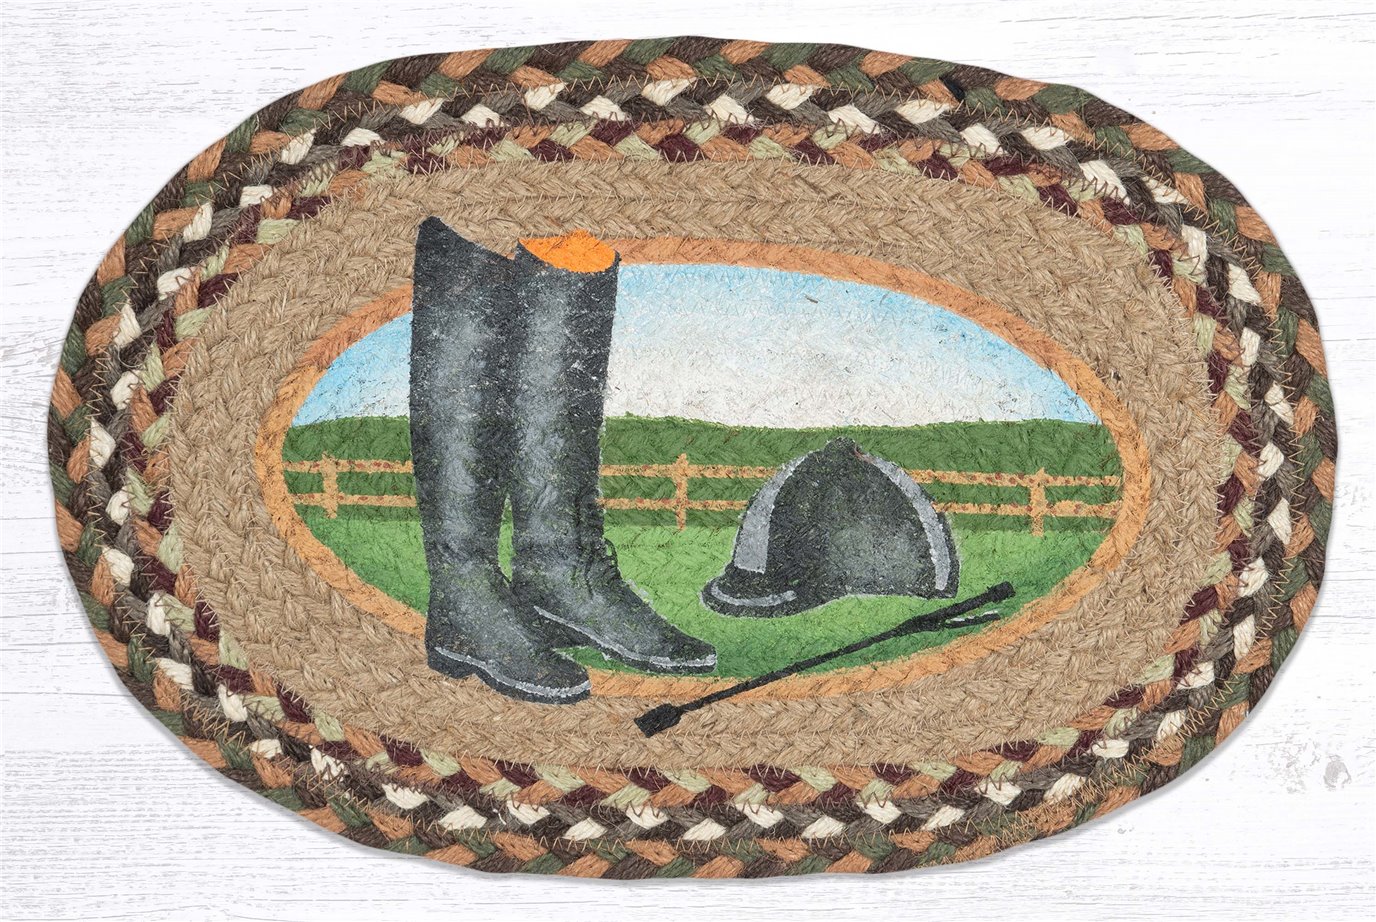 Hat/Boot Printed Oval Swatch 10"x15"